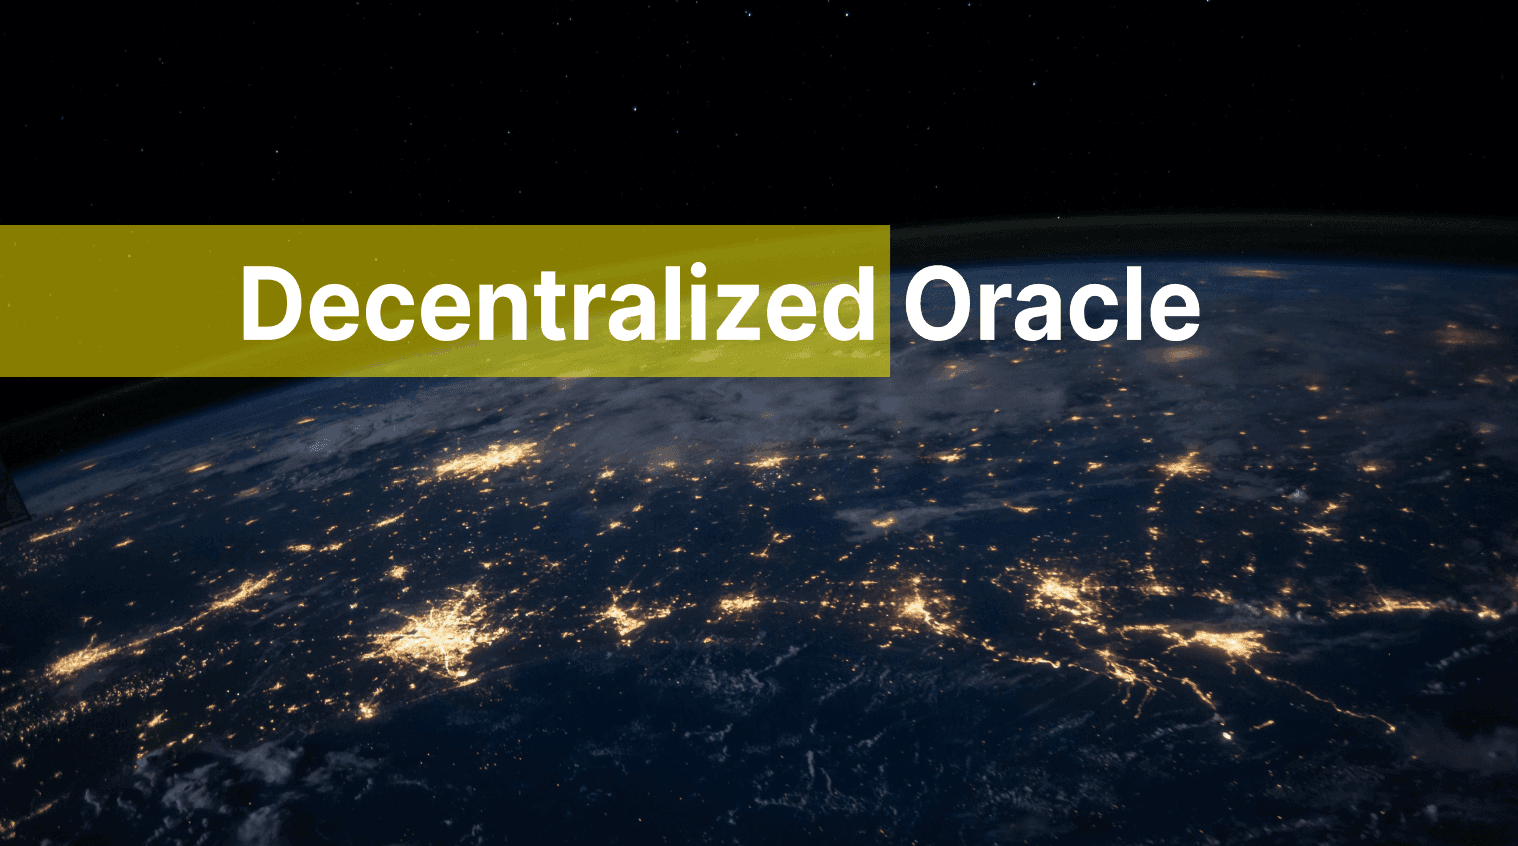 Decentralized Oracle